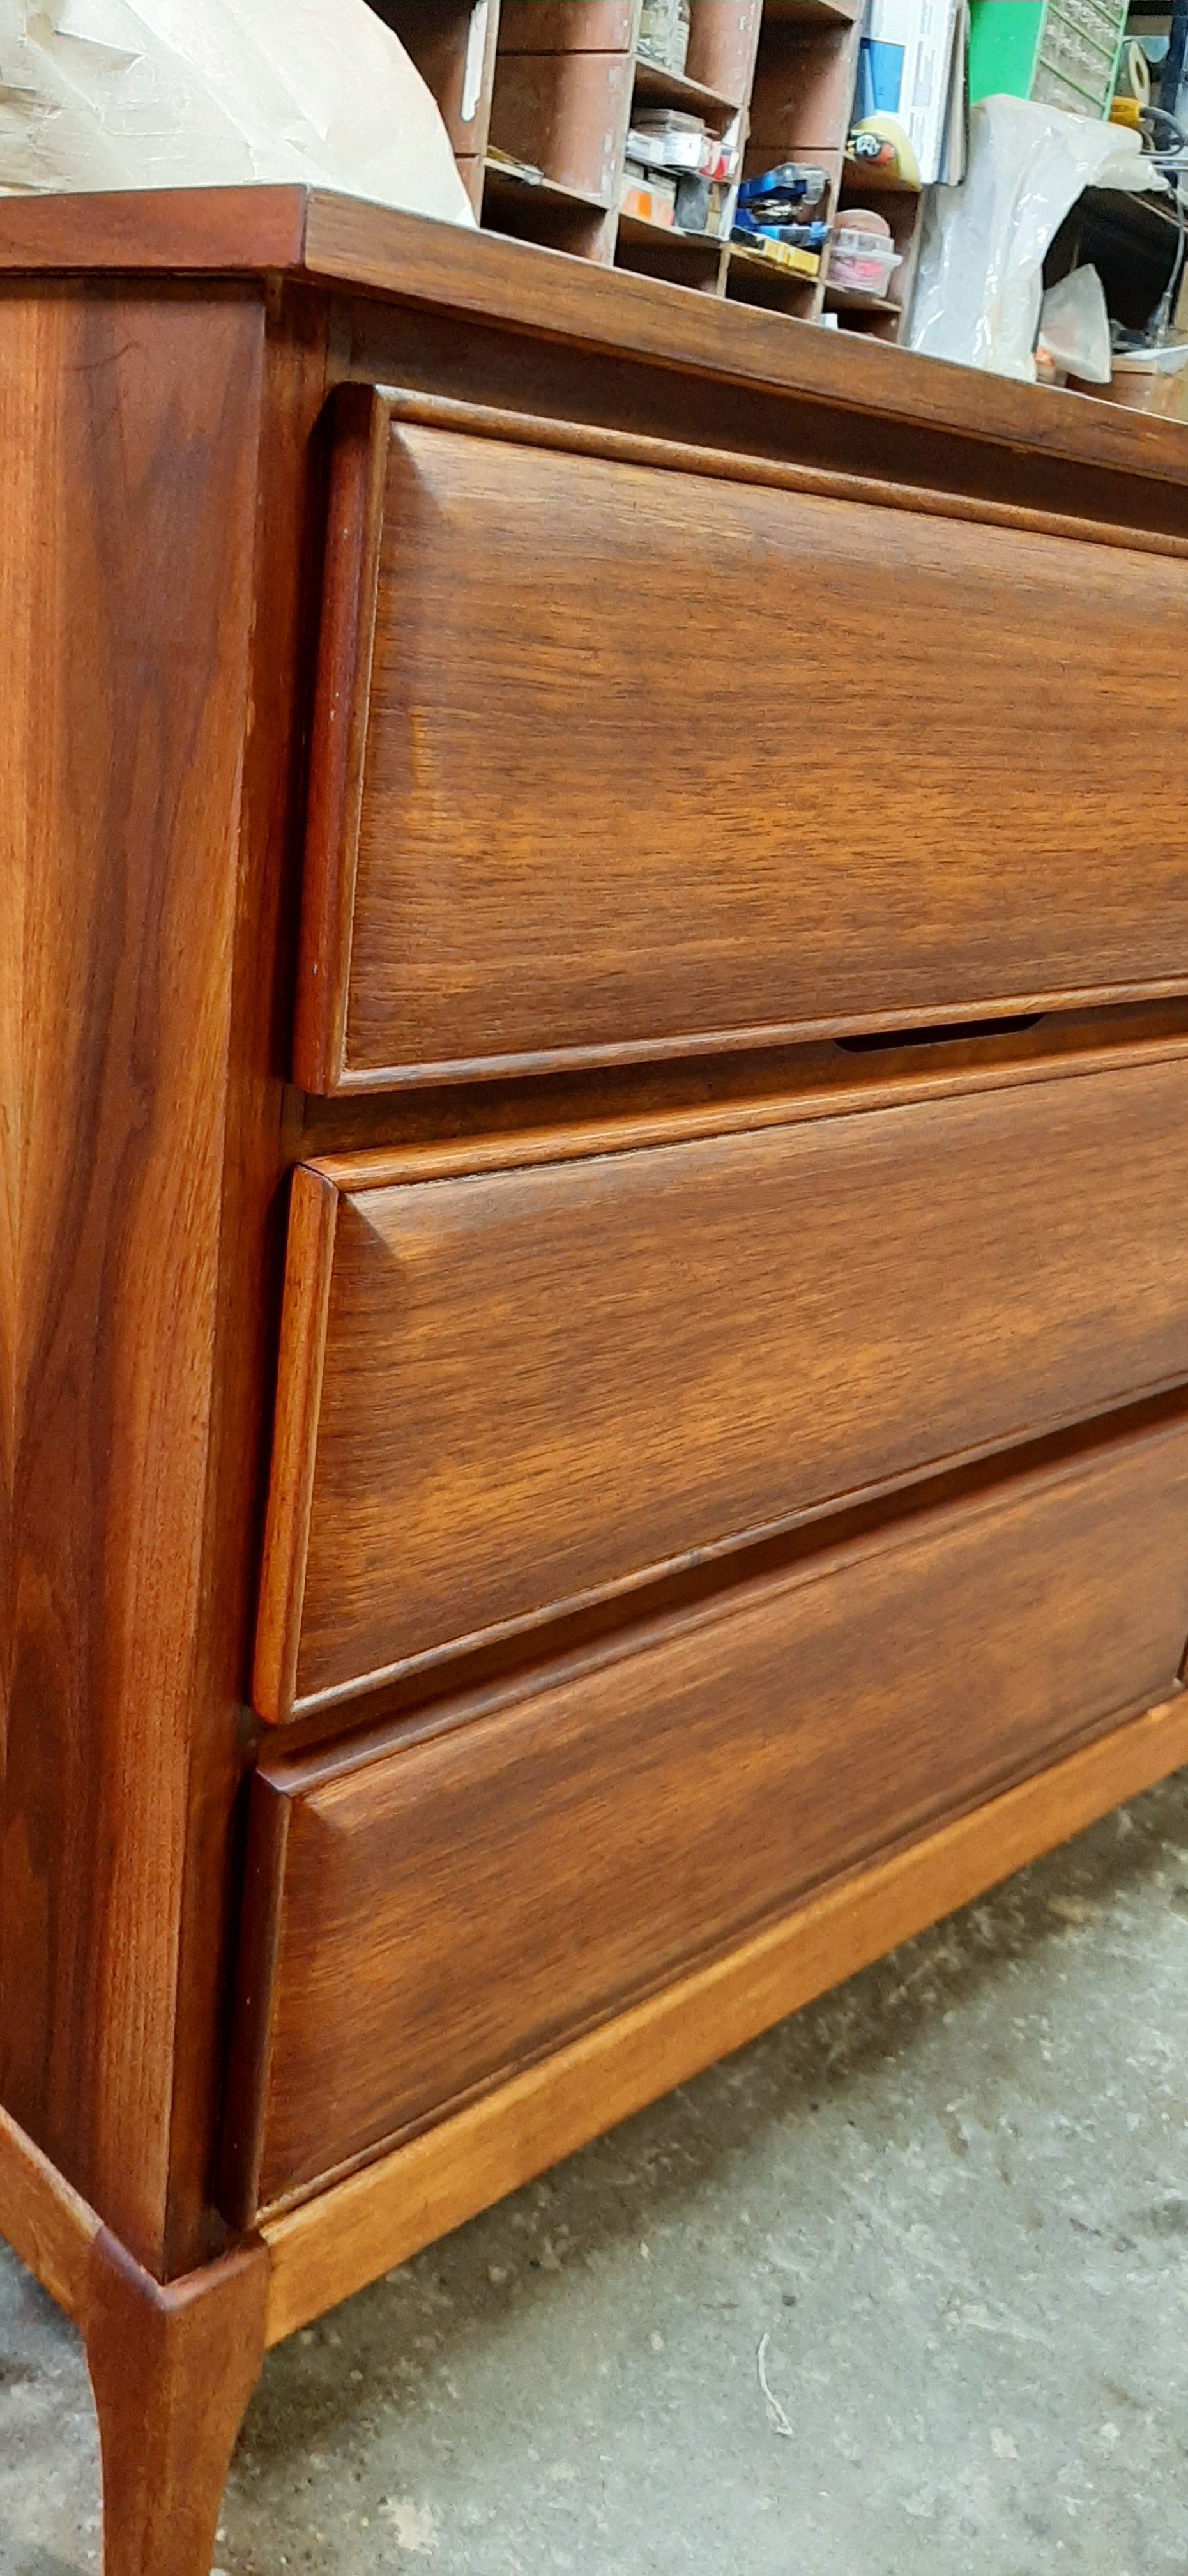 REFINISHED MCM Walnut Dresser 3-Dimensional Front 6ft by HPL Mobilier, PERFECT - Mid Century Modern Toronto